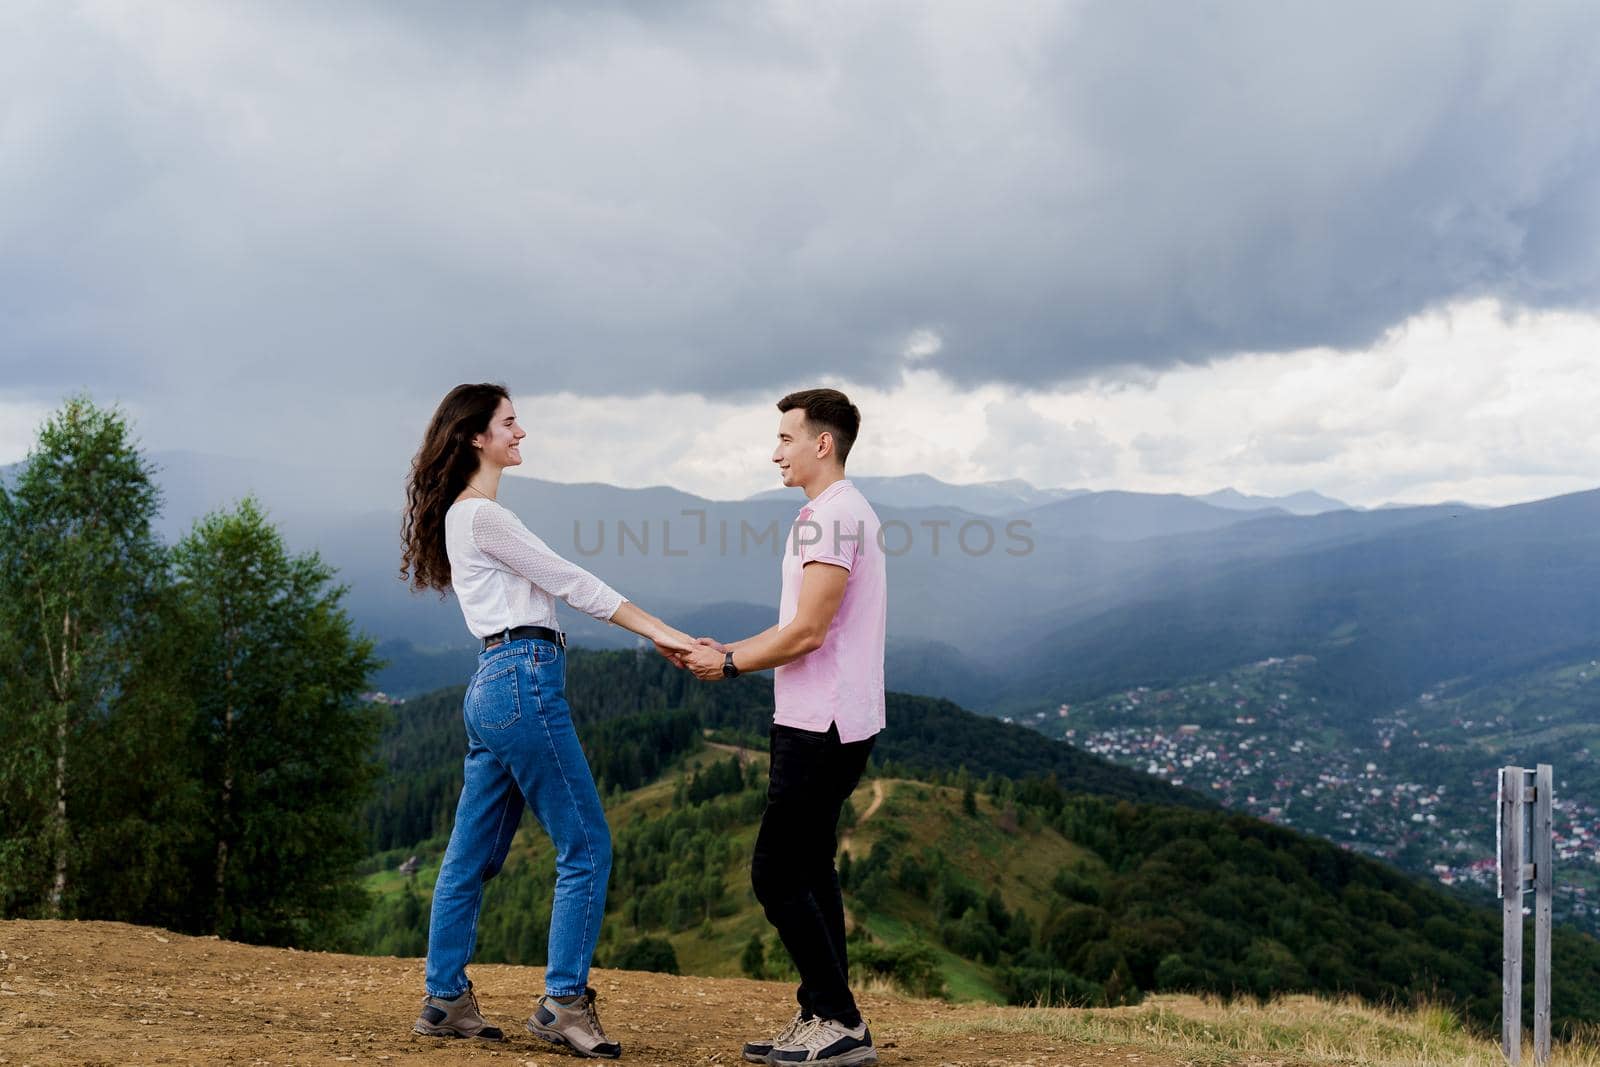 Couple looking to each other at the mountain hills before raining. Feeling freedom together in Karpathian mountains. Tourism travelling in Ukraine.